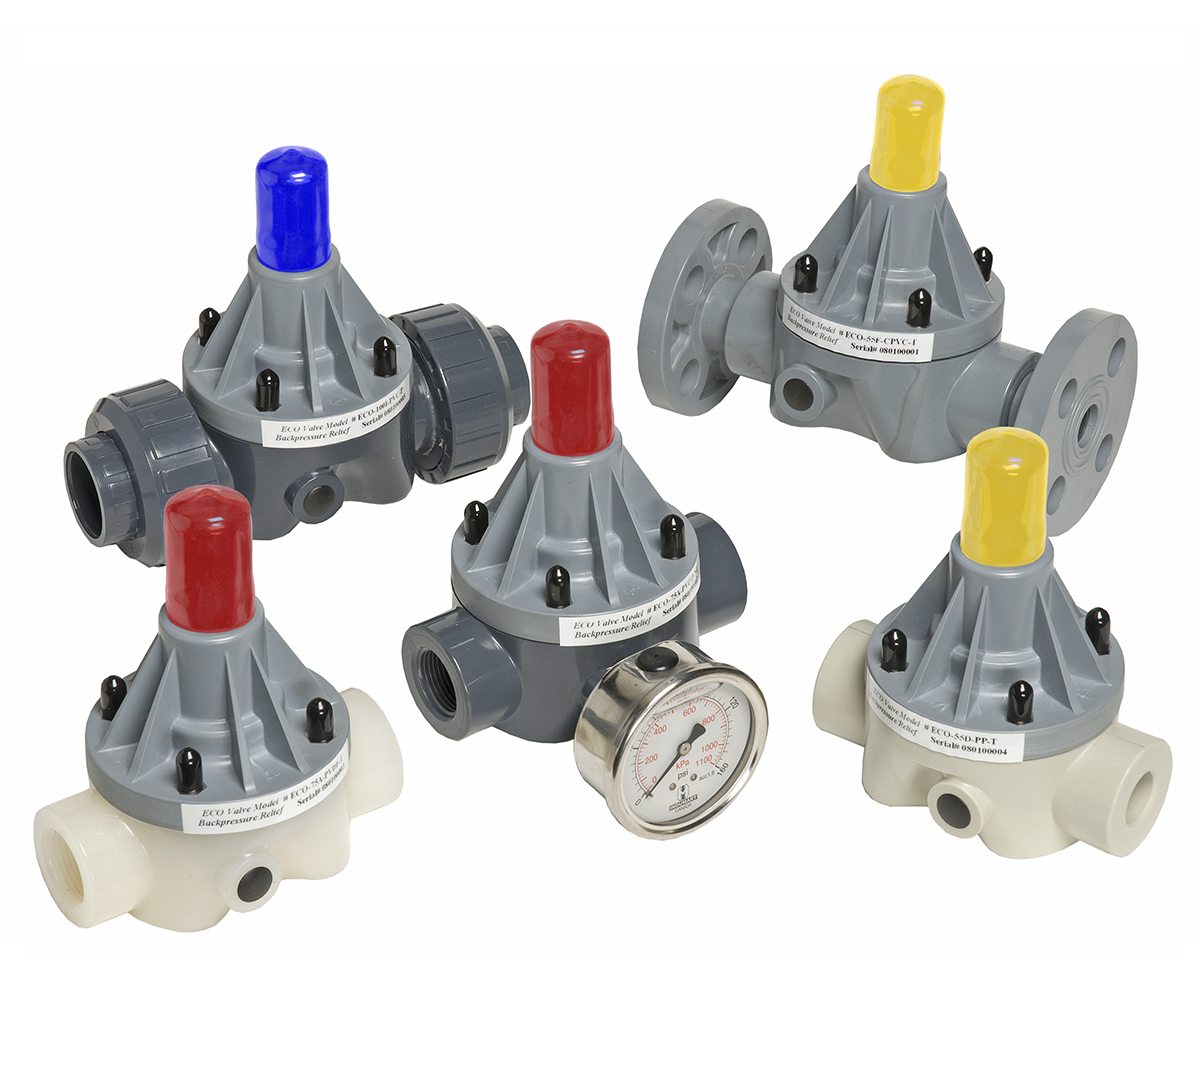 Eco Valve Back Pressure and Pressure Relief Valves in Plastic and Metal